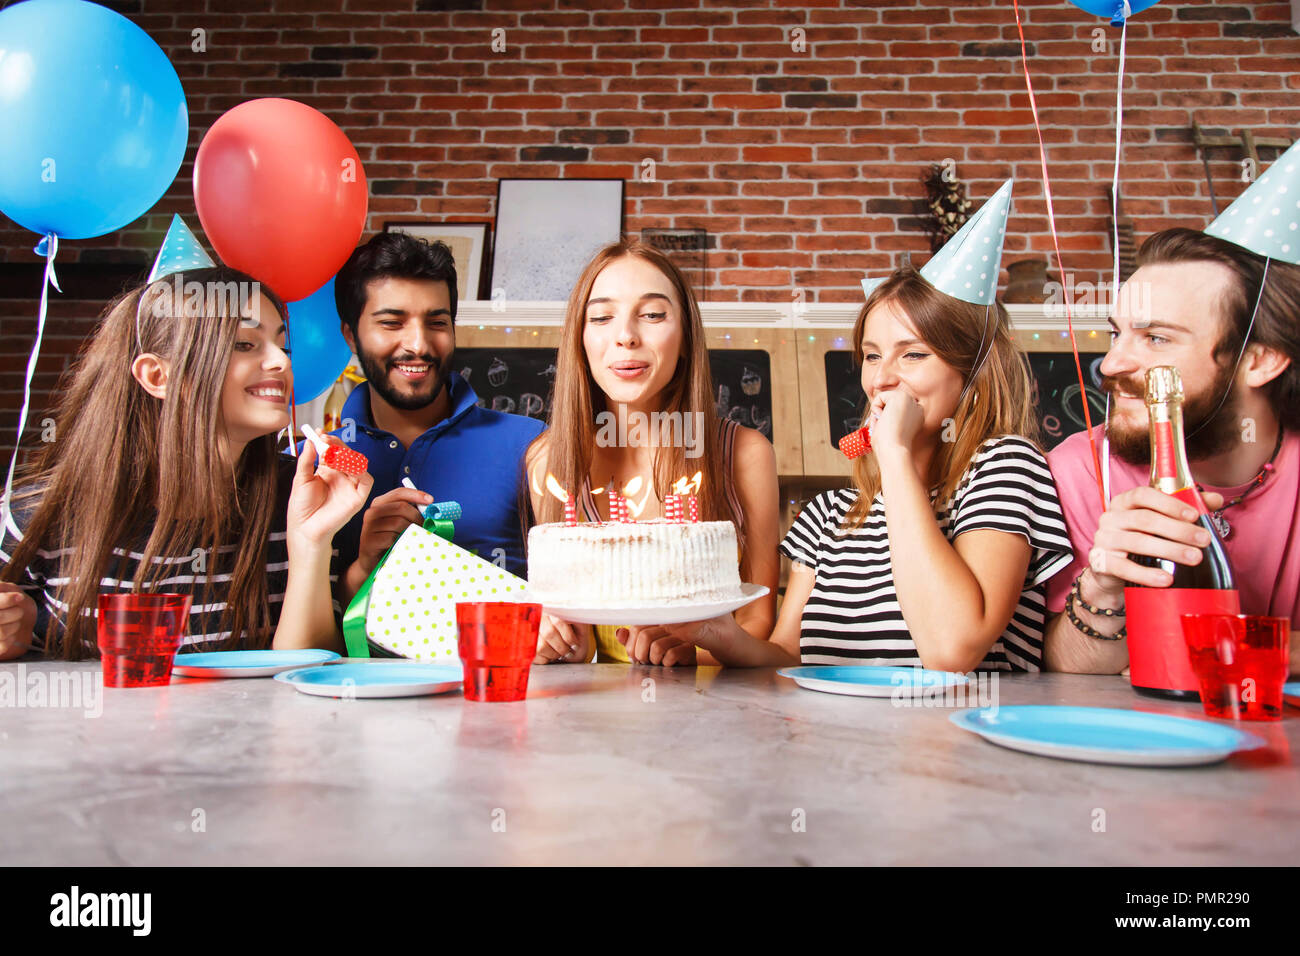 Gorgeous young brunette woman celebrating her birthday getting ready to blow out the candles on the cake watched by a smiling group of friends Stock Photo